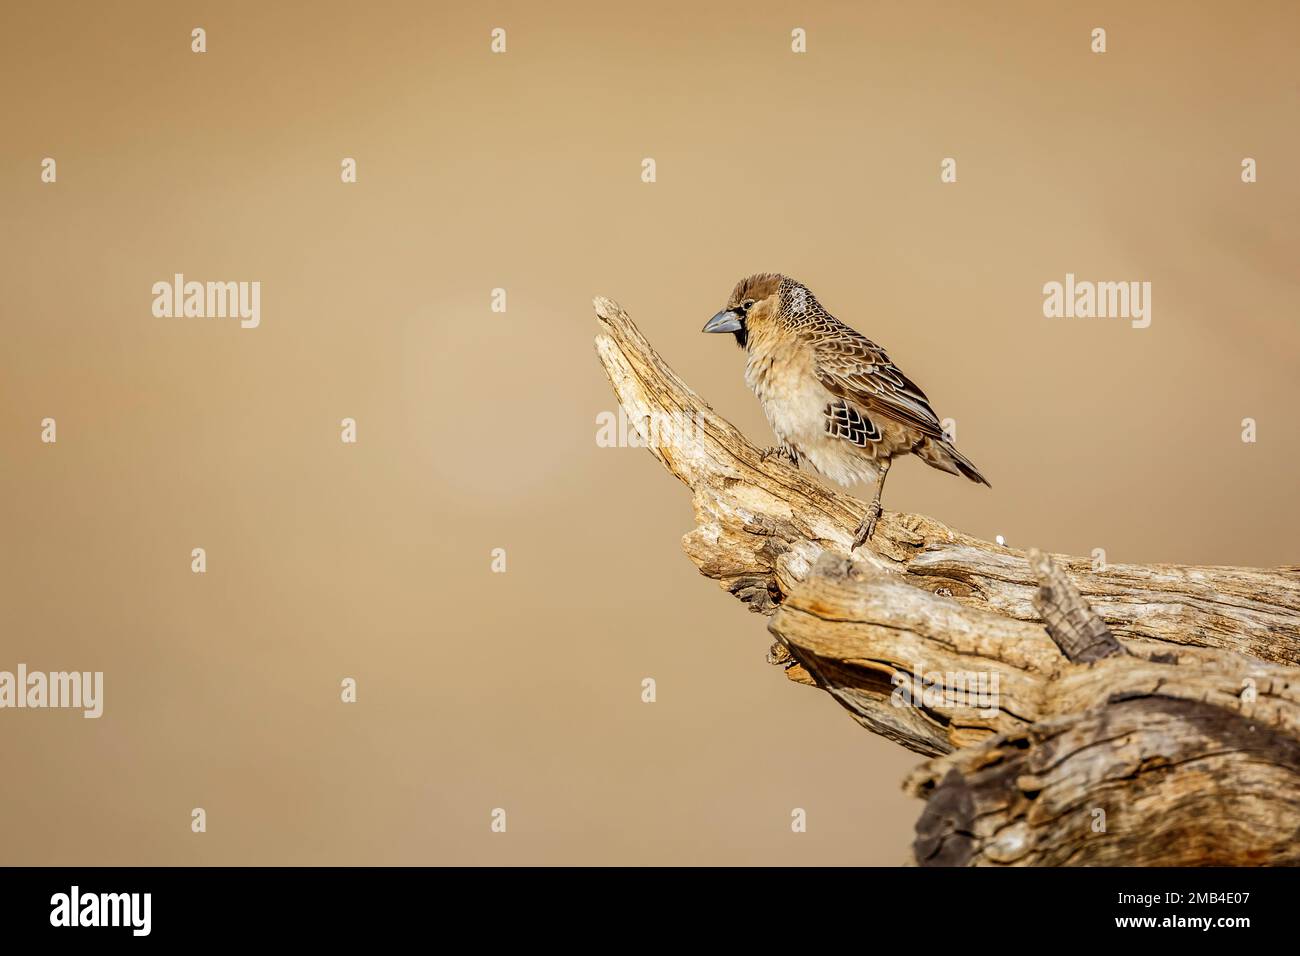 Sociable Weaver standing on a log isolated in natural background in Kgalagadi transfrontier park, South Africa; specie Philetairus socius family of Pl Stock Photo